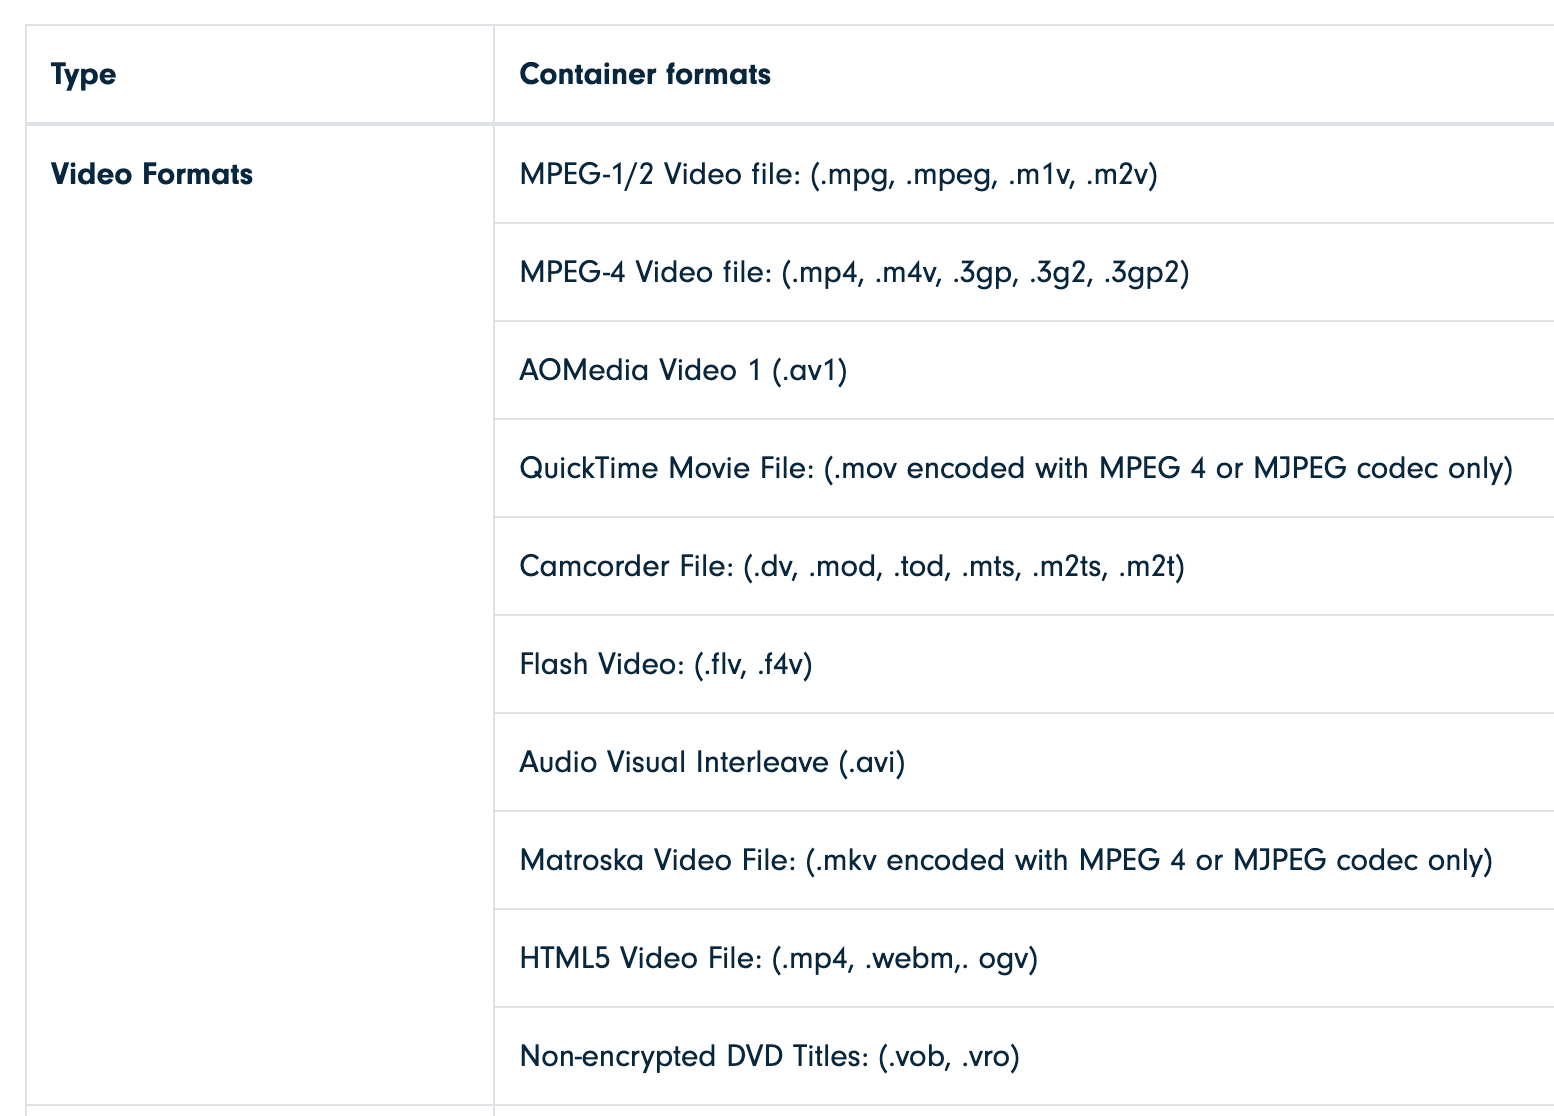 Filmora's own list of support video import formats